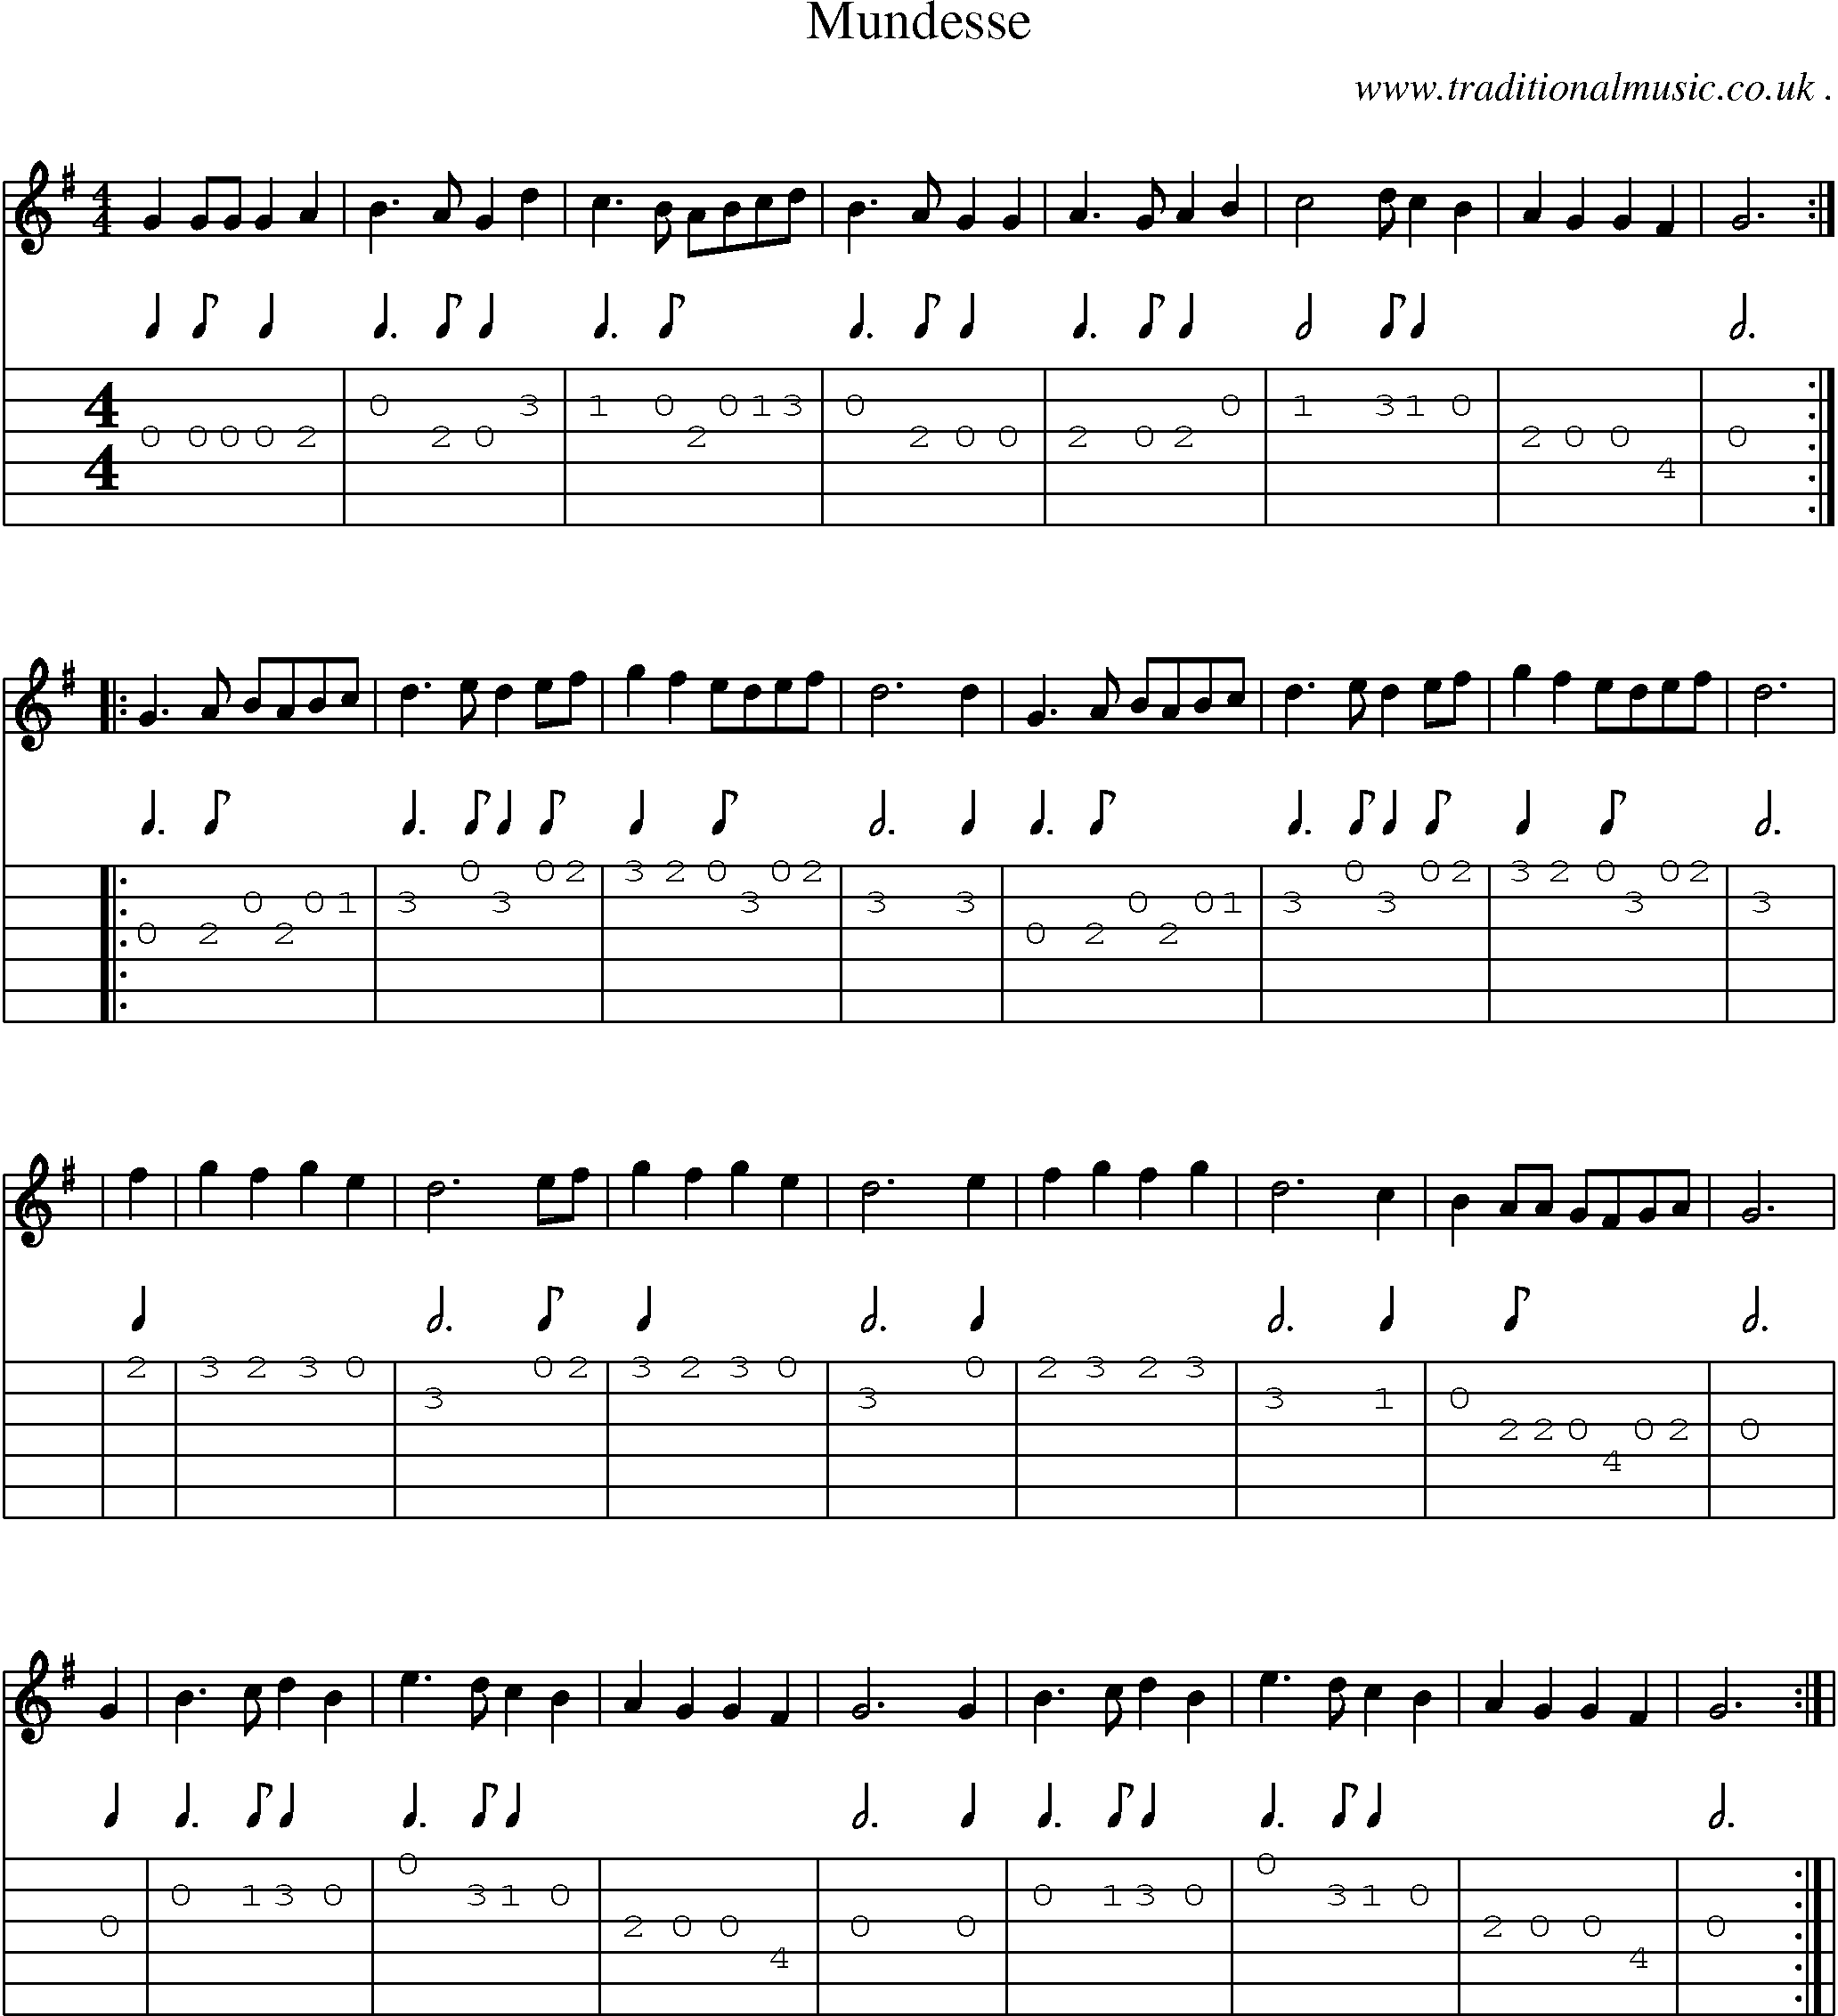 Sheet-Music and Guitar Tabs for Mundesse